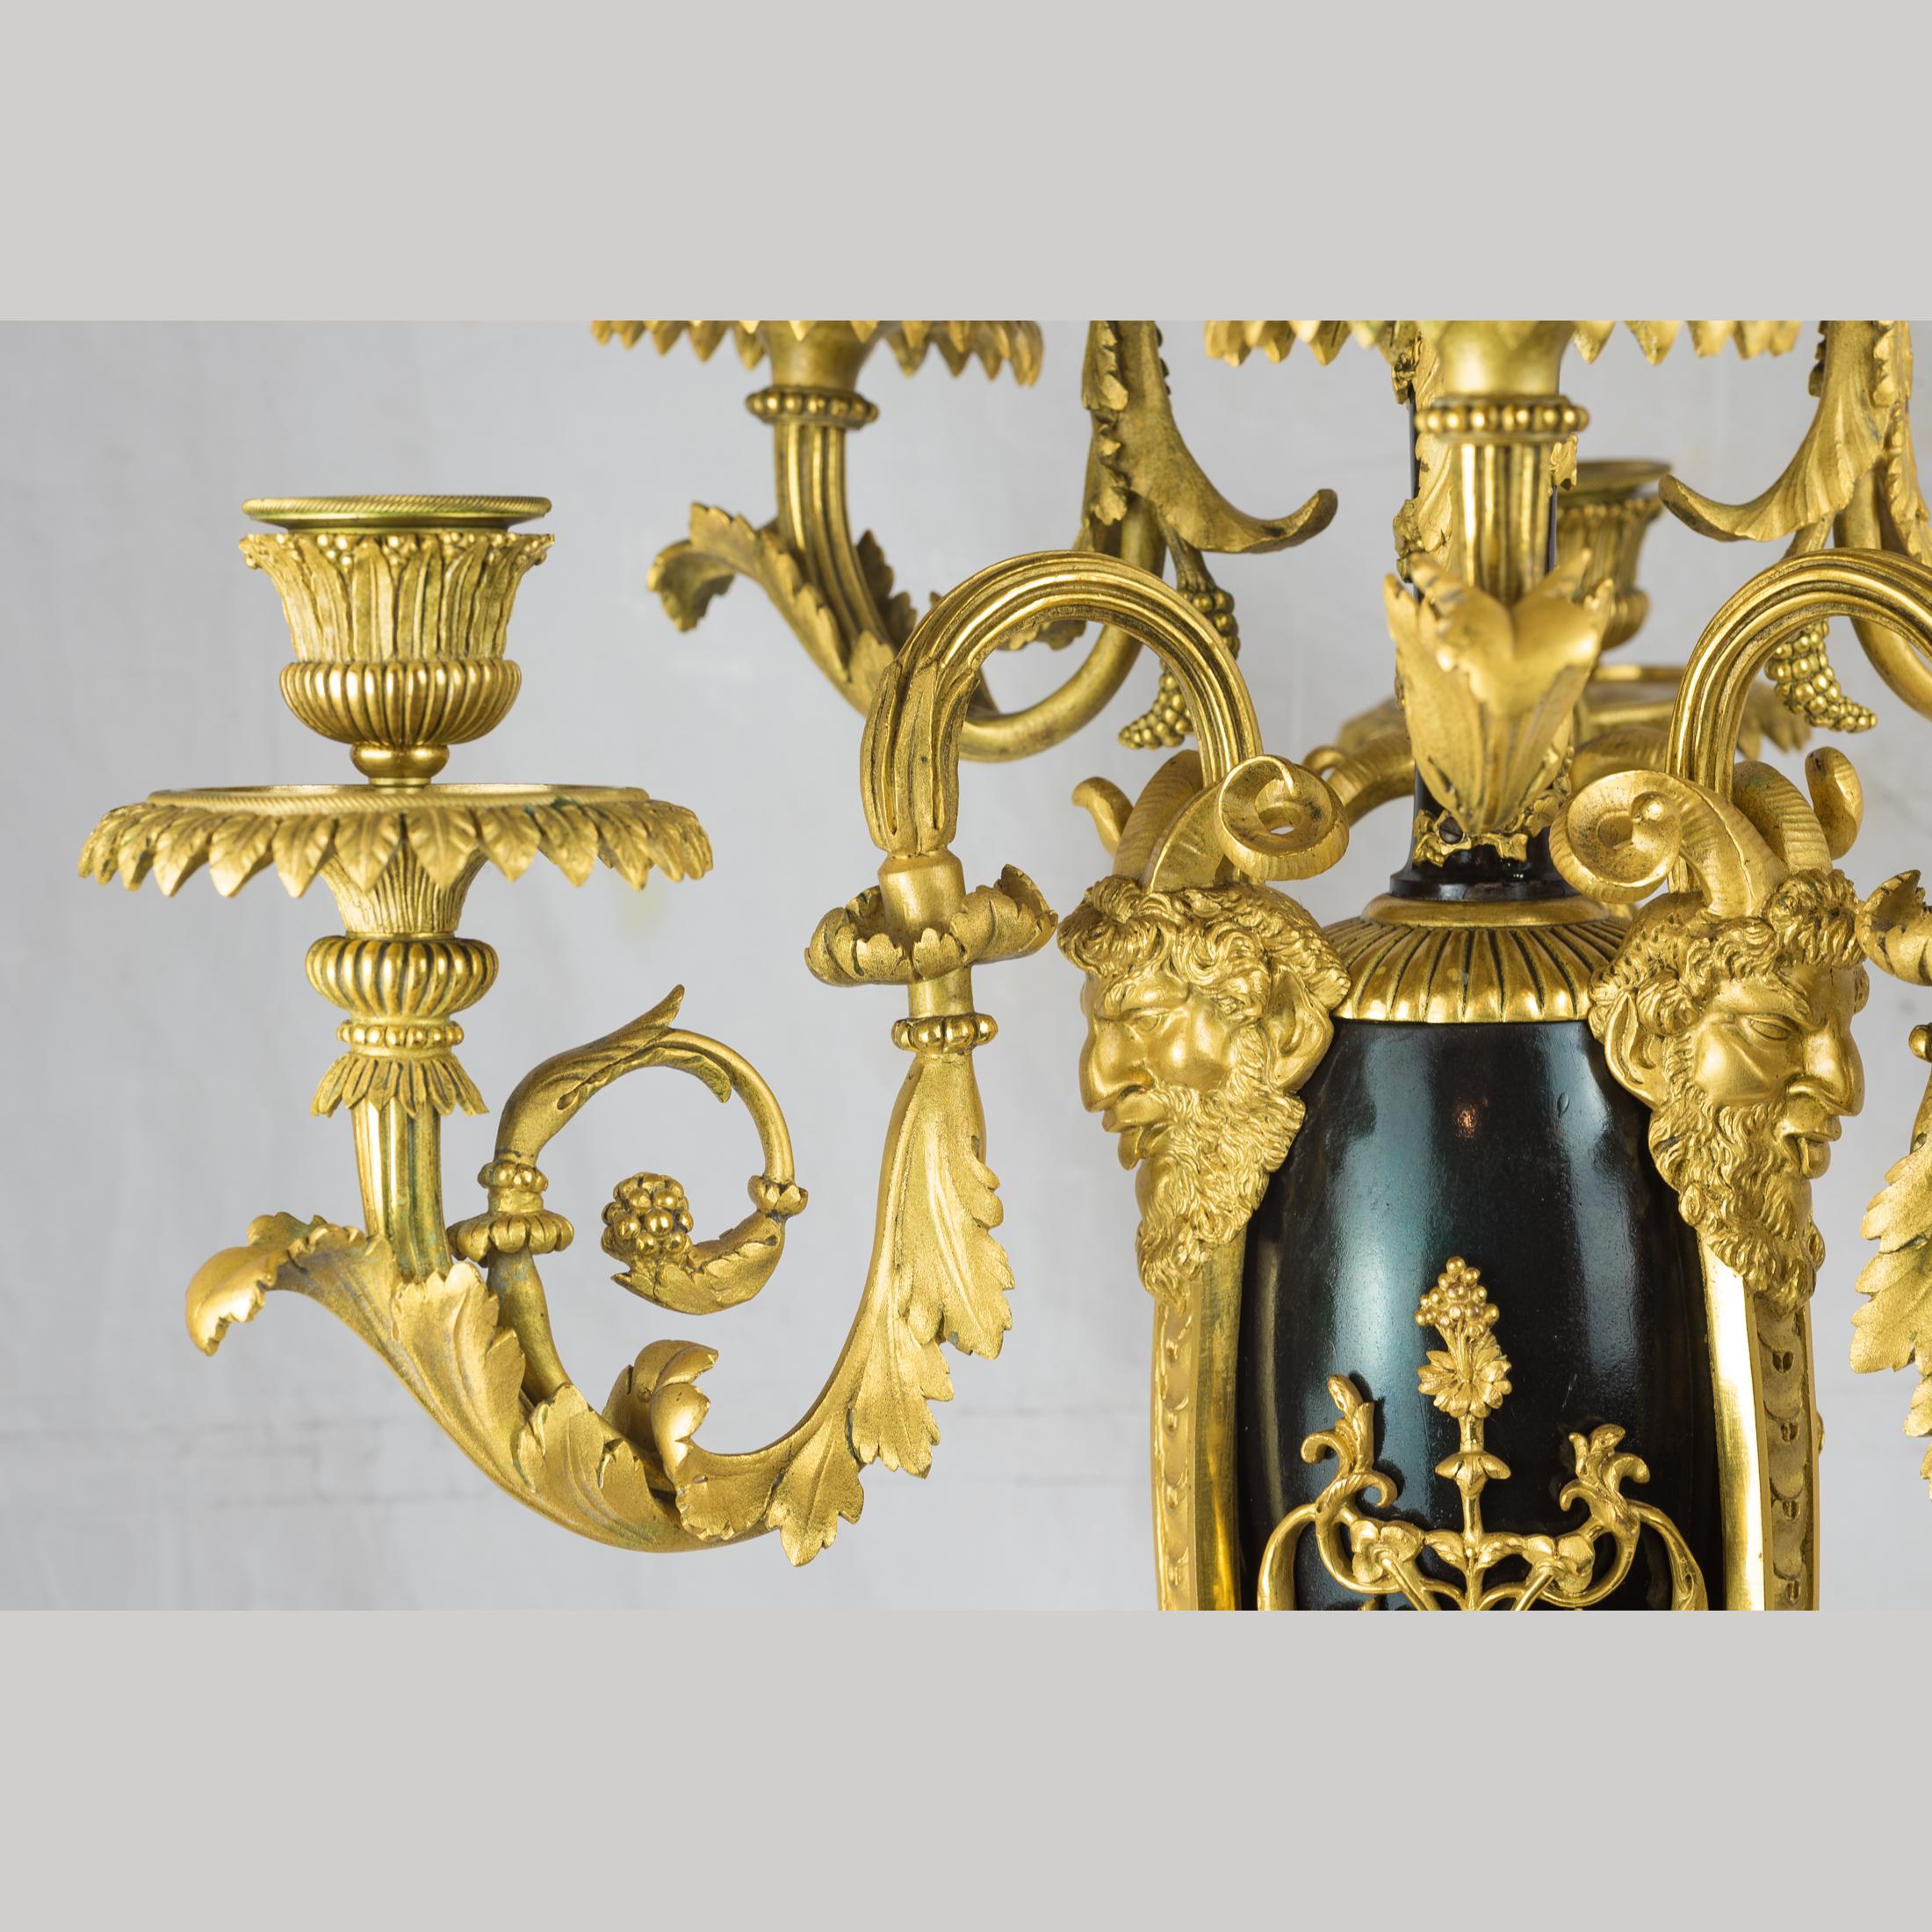 Pair of Napoleon III Gilt-Bronze Six-Light Candelabras Attributed to Beurdeley In Good Condition For Sale In New York, NY